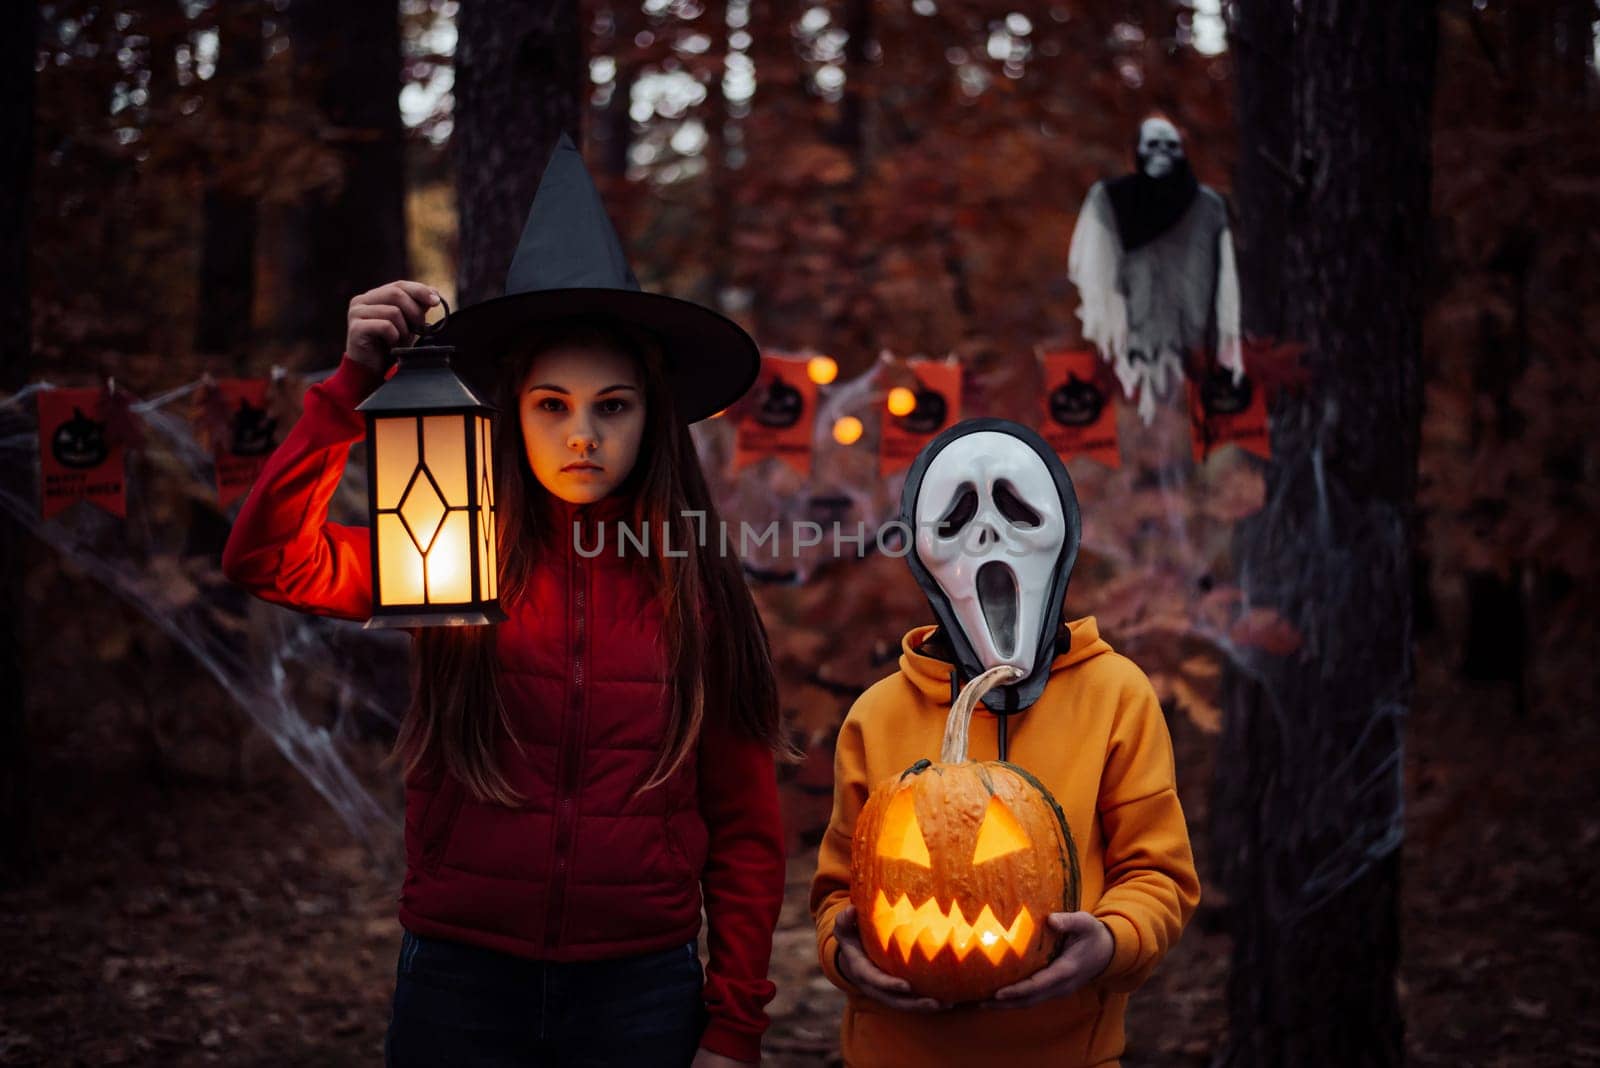 Small boy in mask of a ghost, girl holding lantern